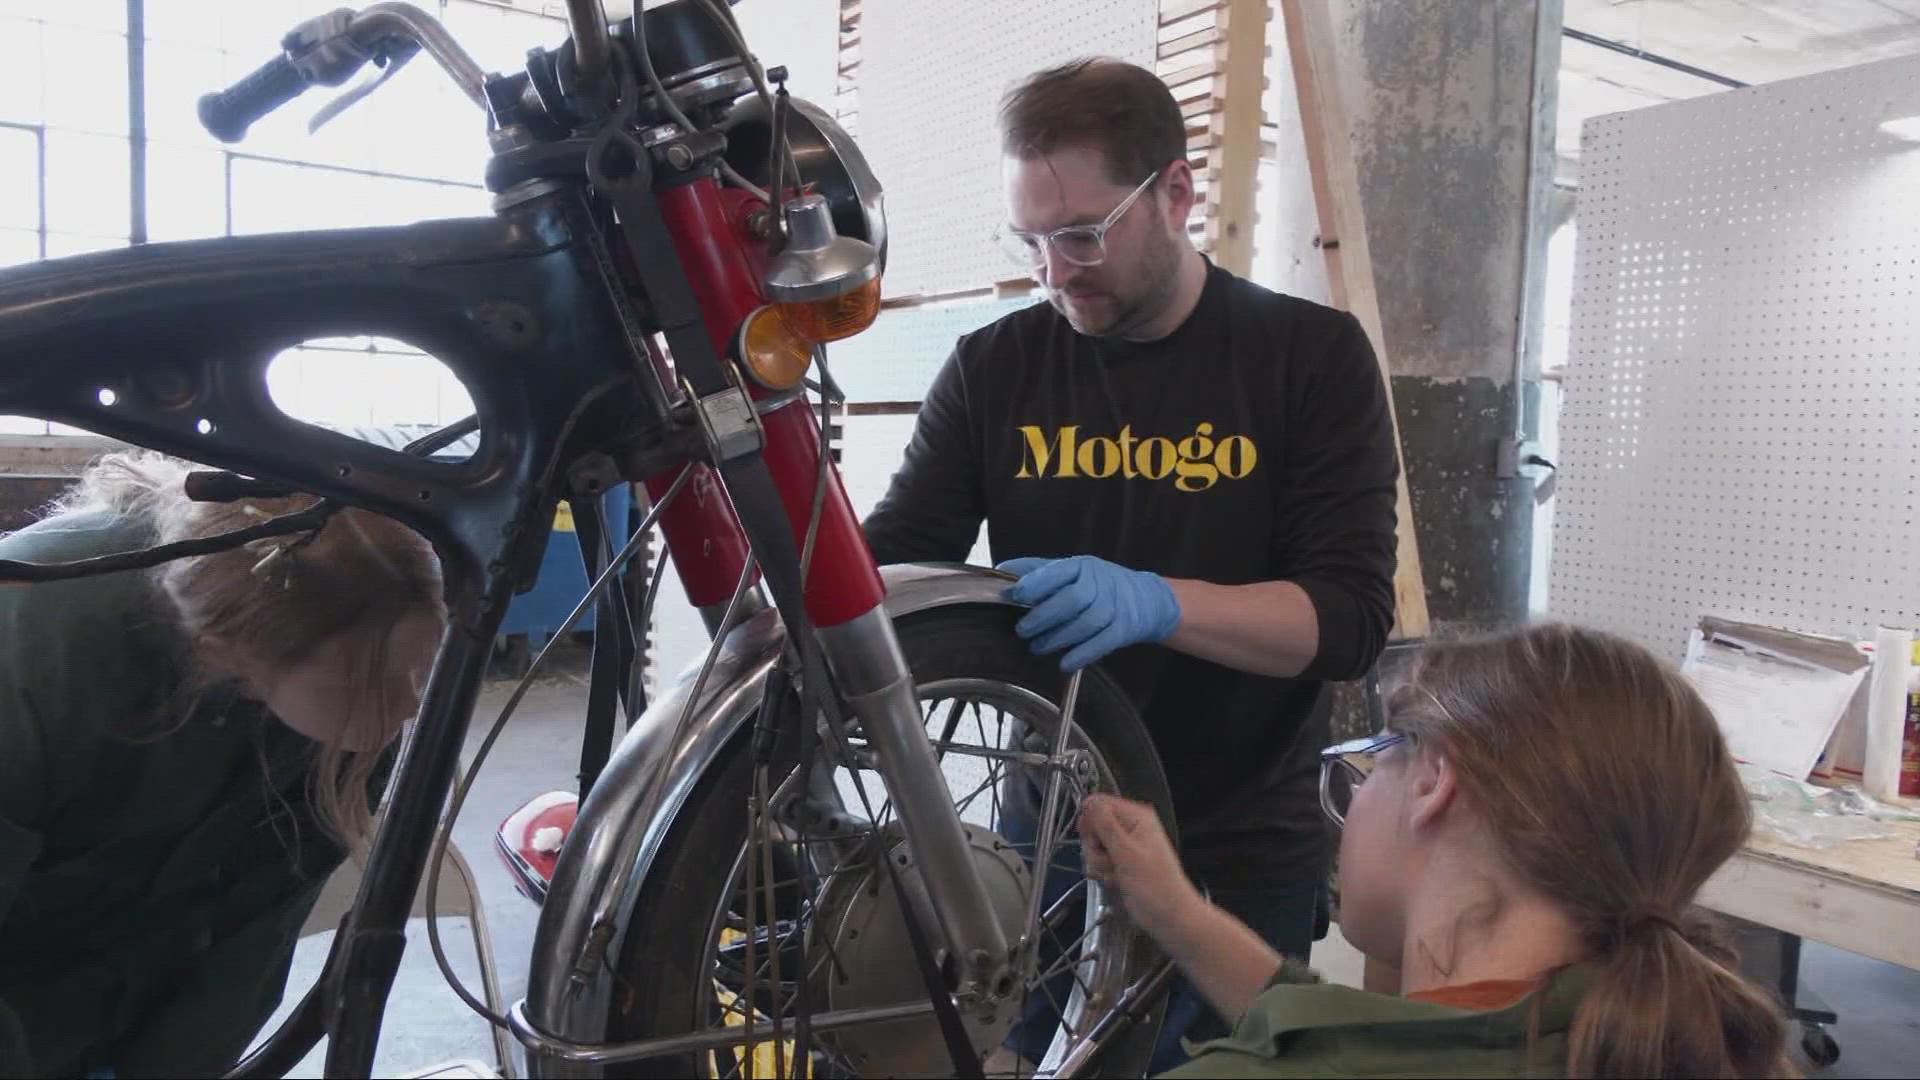 Motogo's mission? 'We teach kids to solve problems through motorcycles.'